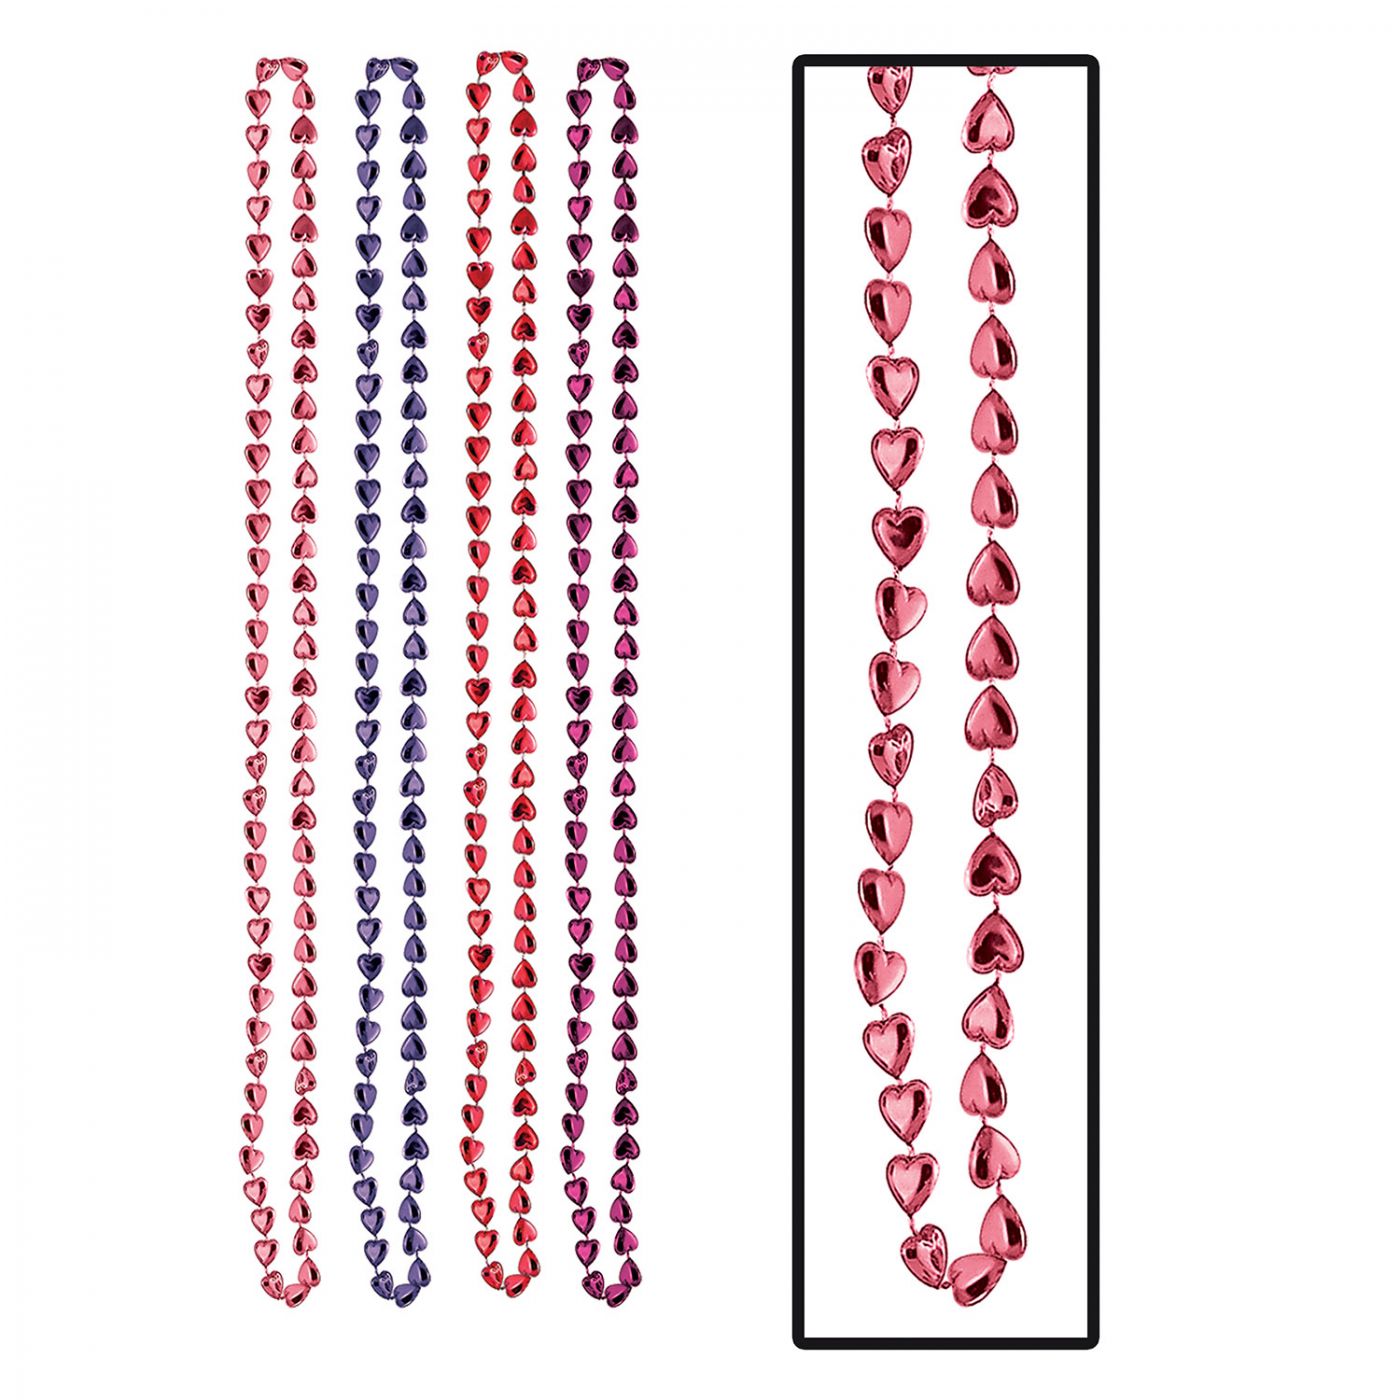 Image of Candy Heart Beads